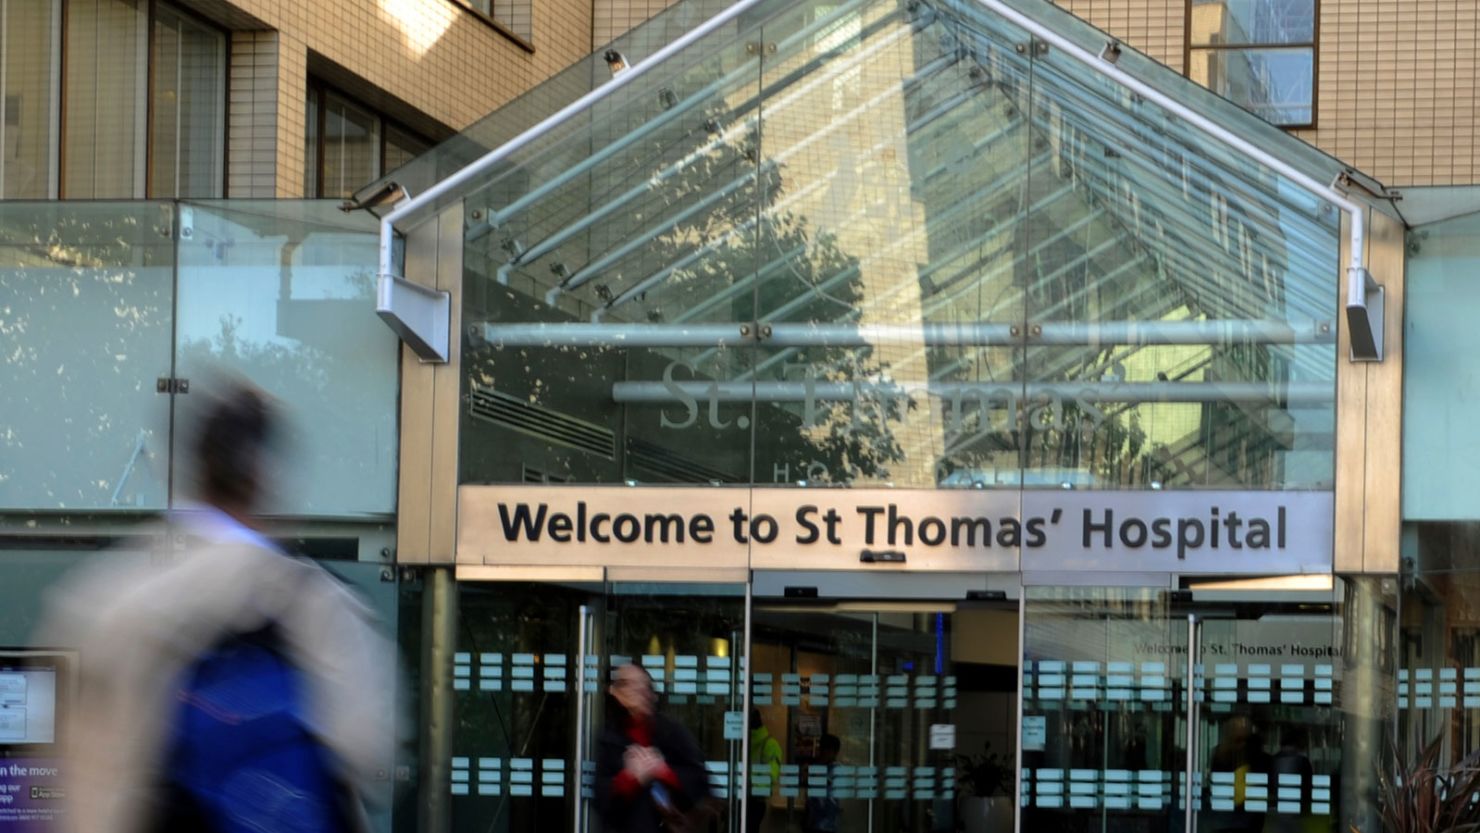 St Thomas' Hospital in London is one of the institutions affected by the cyberattack.